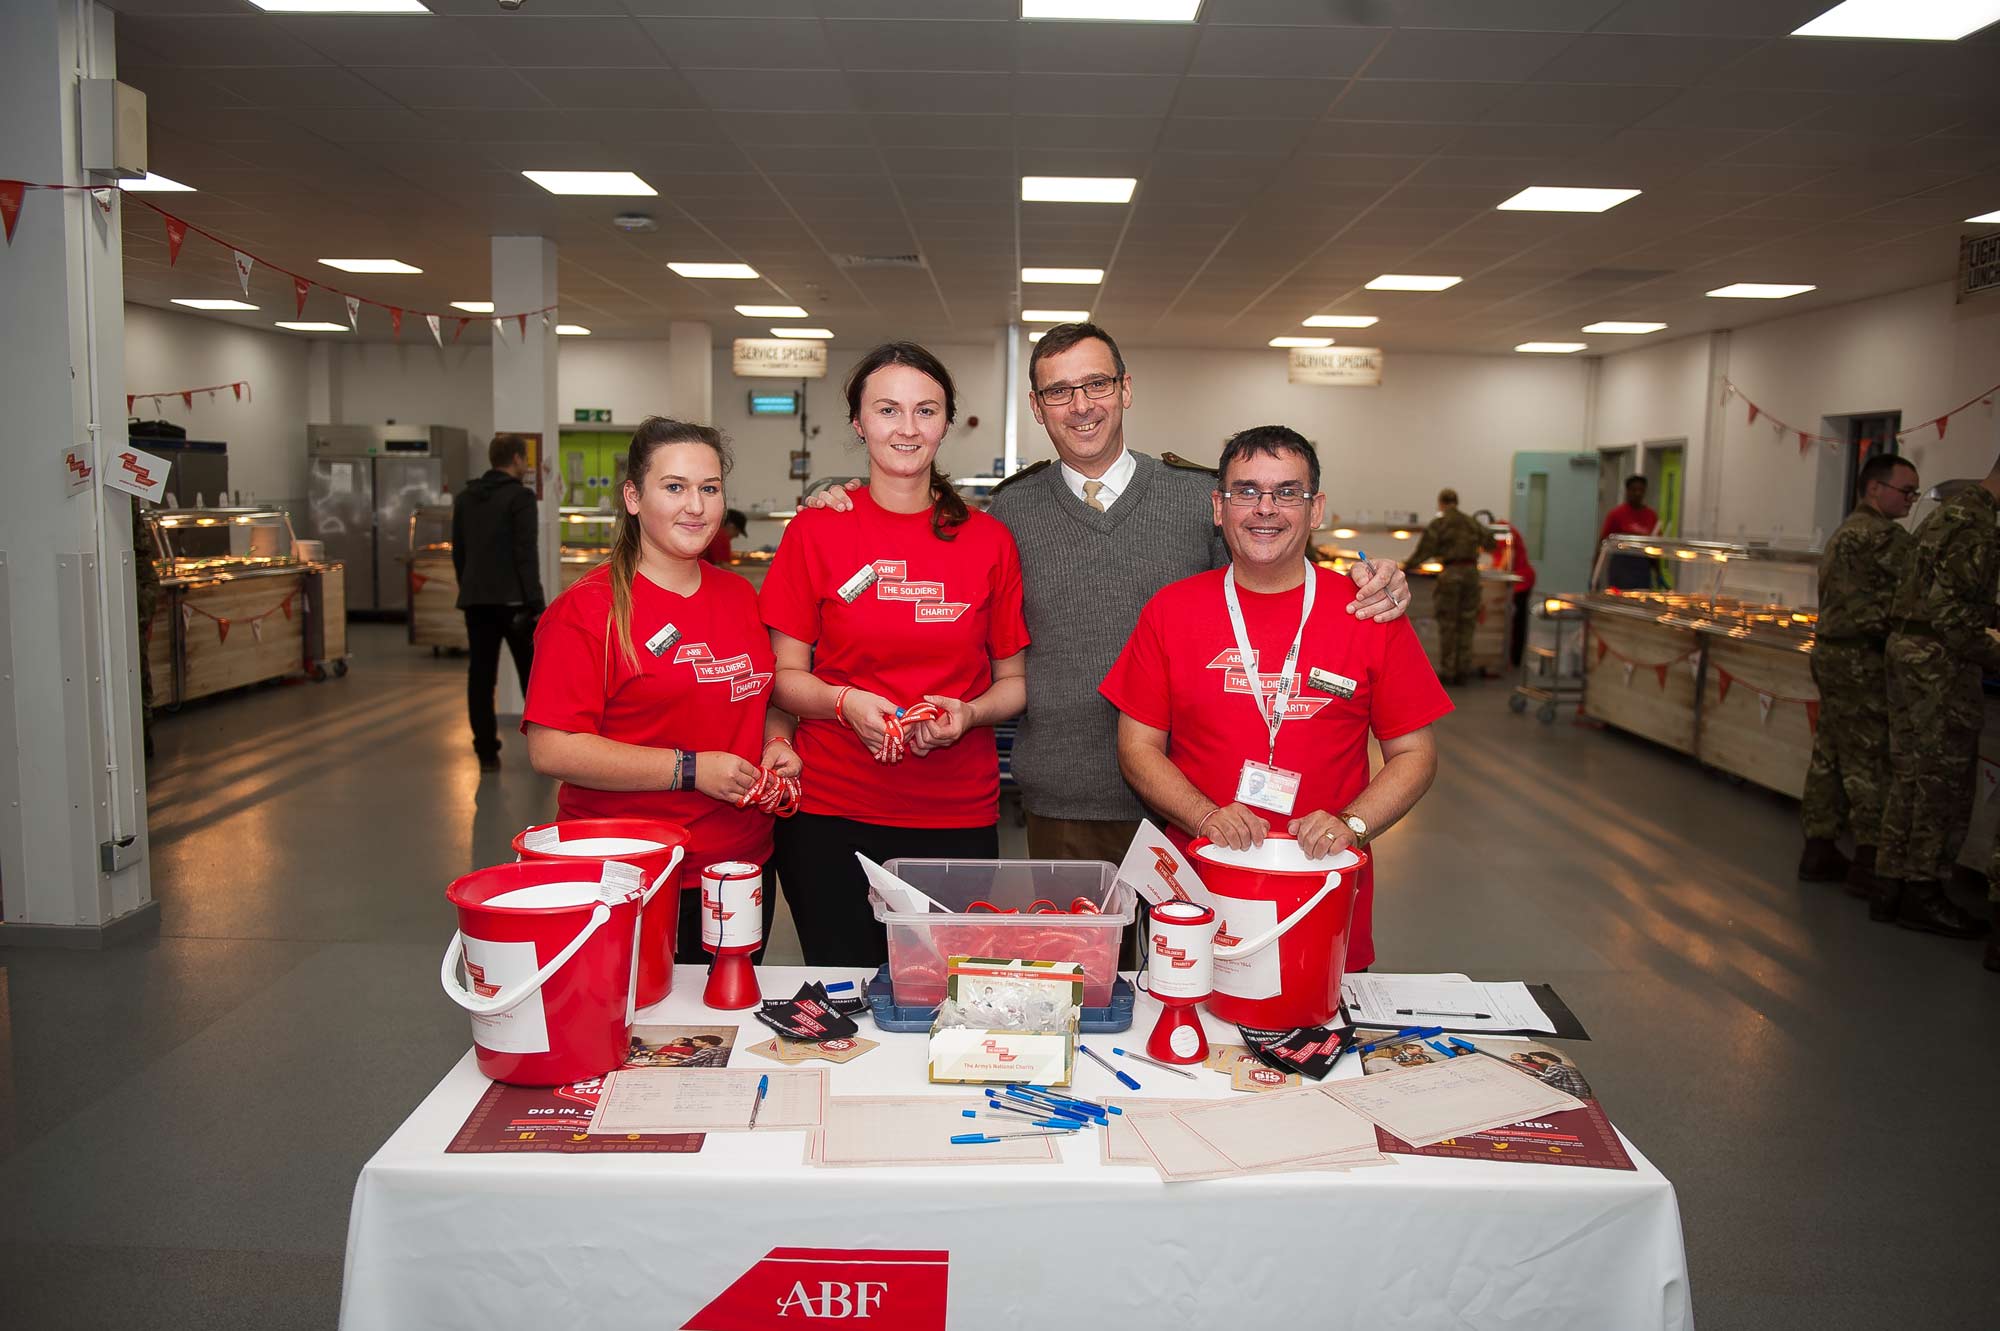 The ABF charity fundraising team